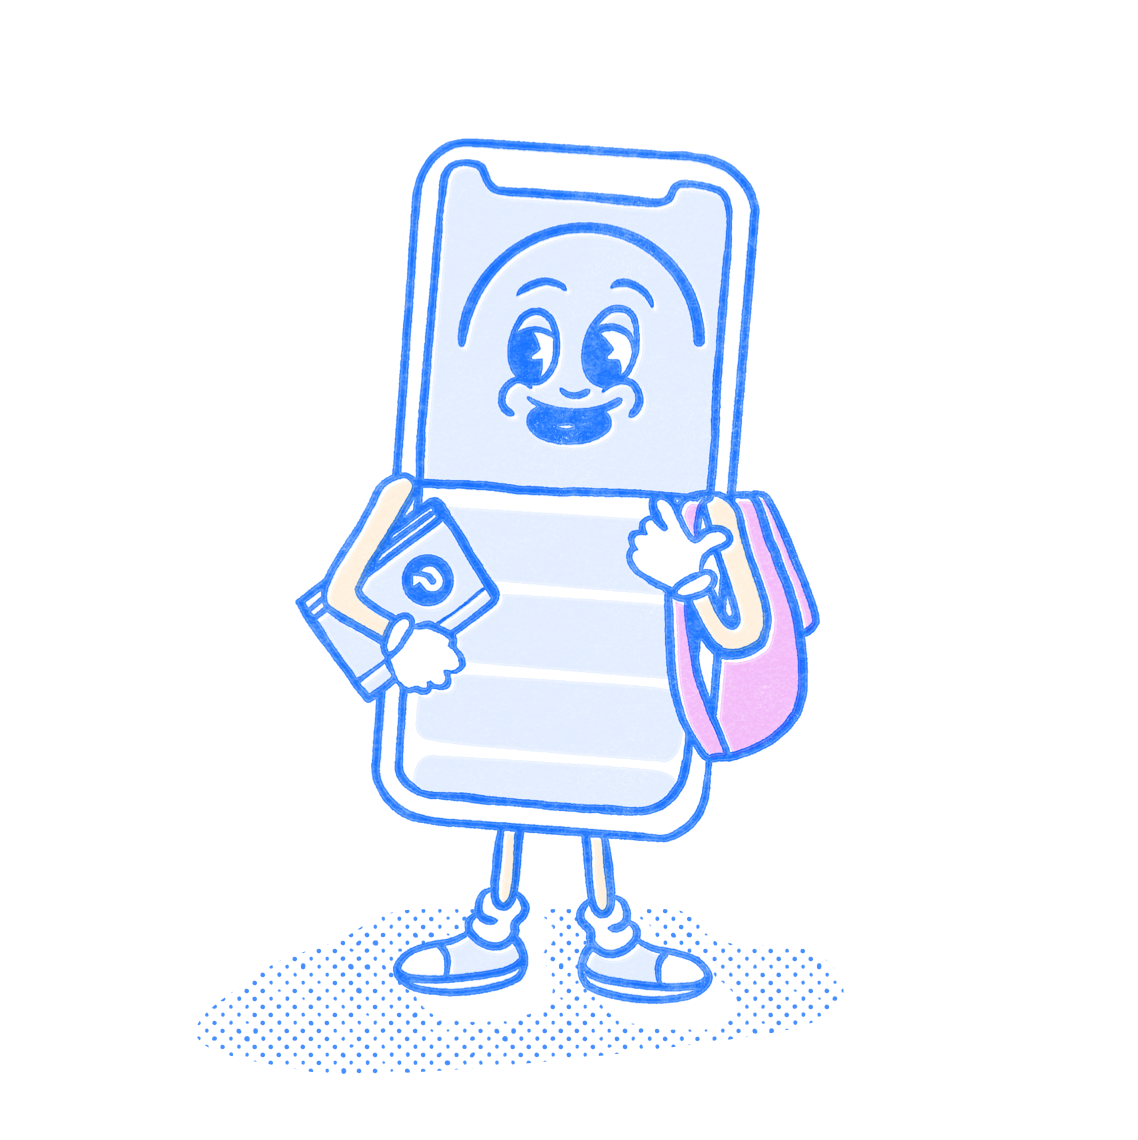 Essentials Pocket Prep mascot holding a notebook and a backpack. Illustration.